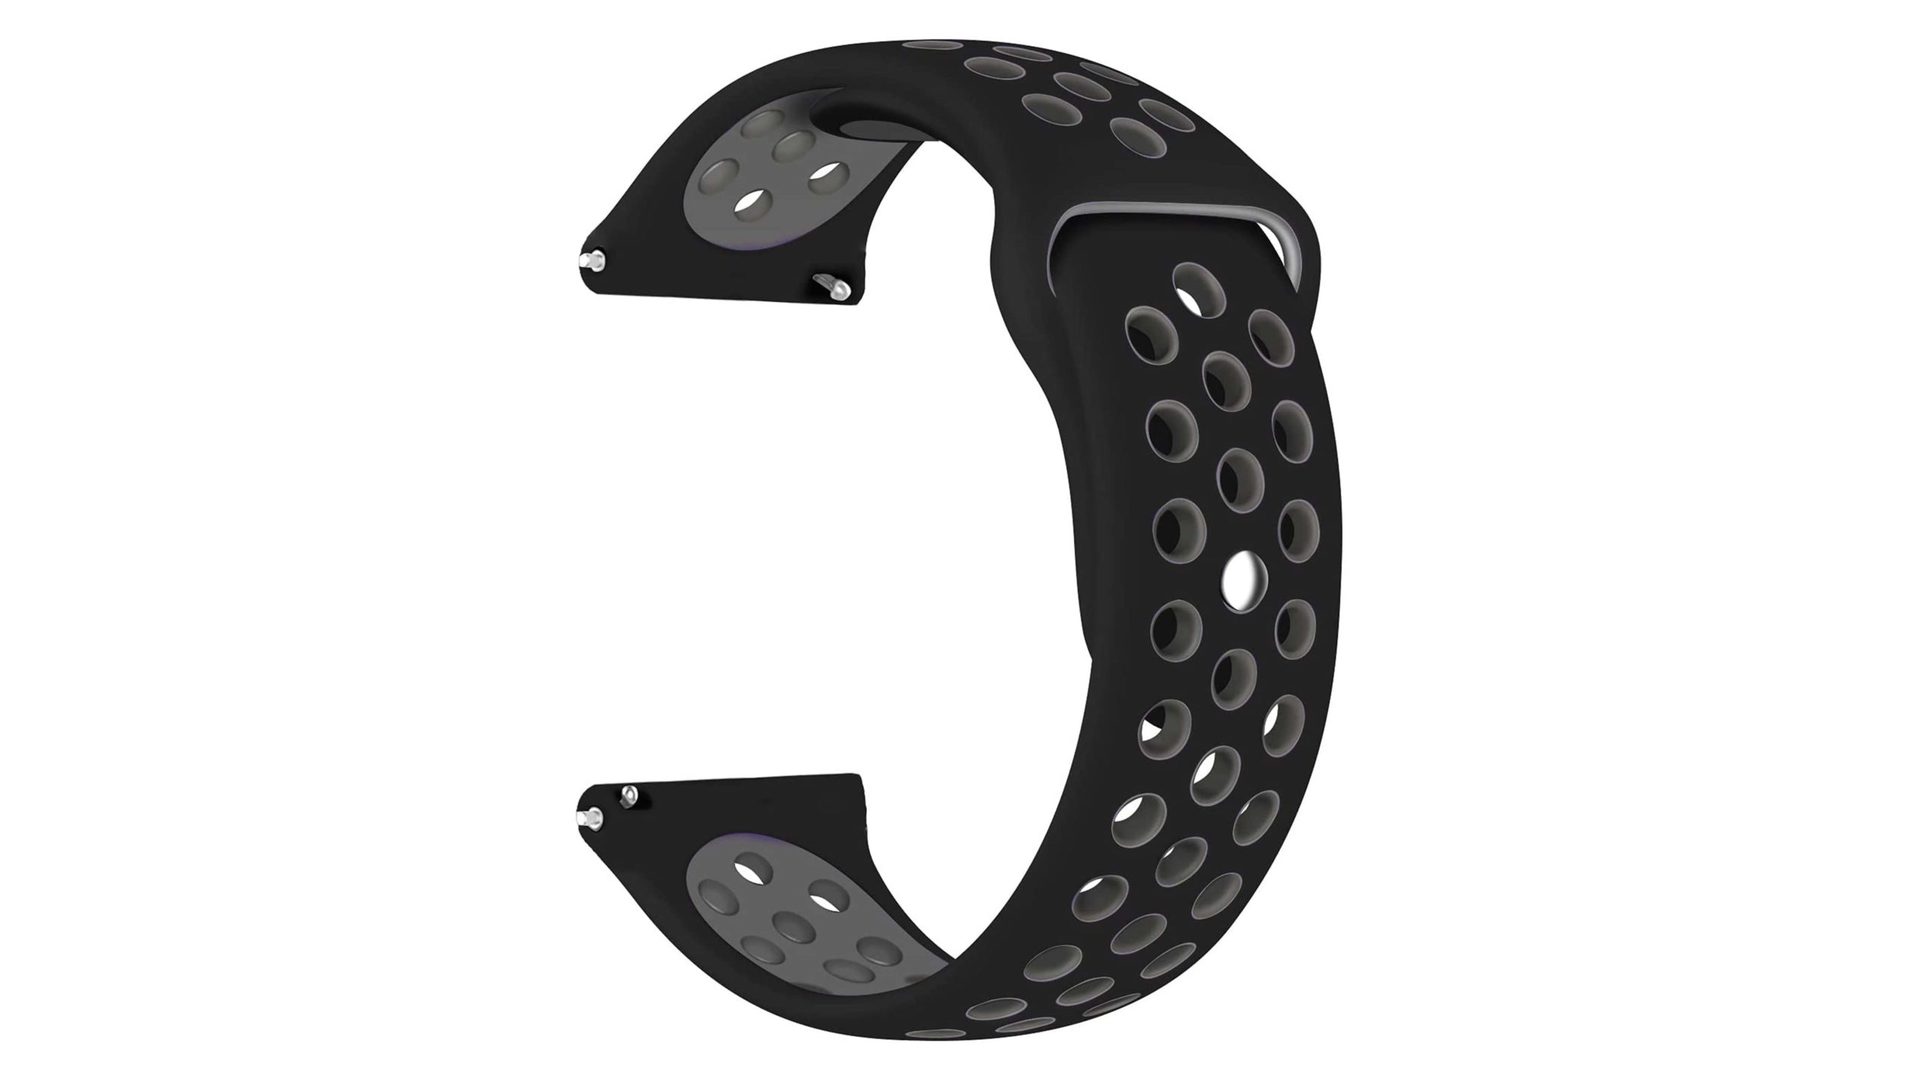 Product image of a Band4u silicone sport band in black and grey.